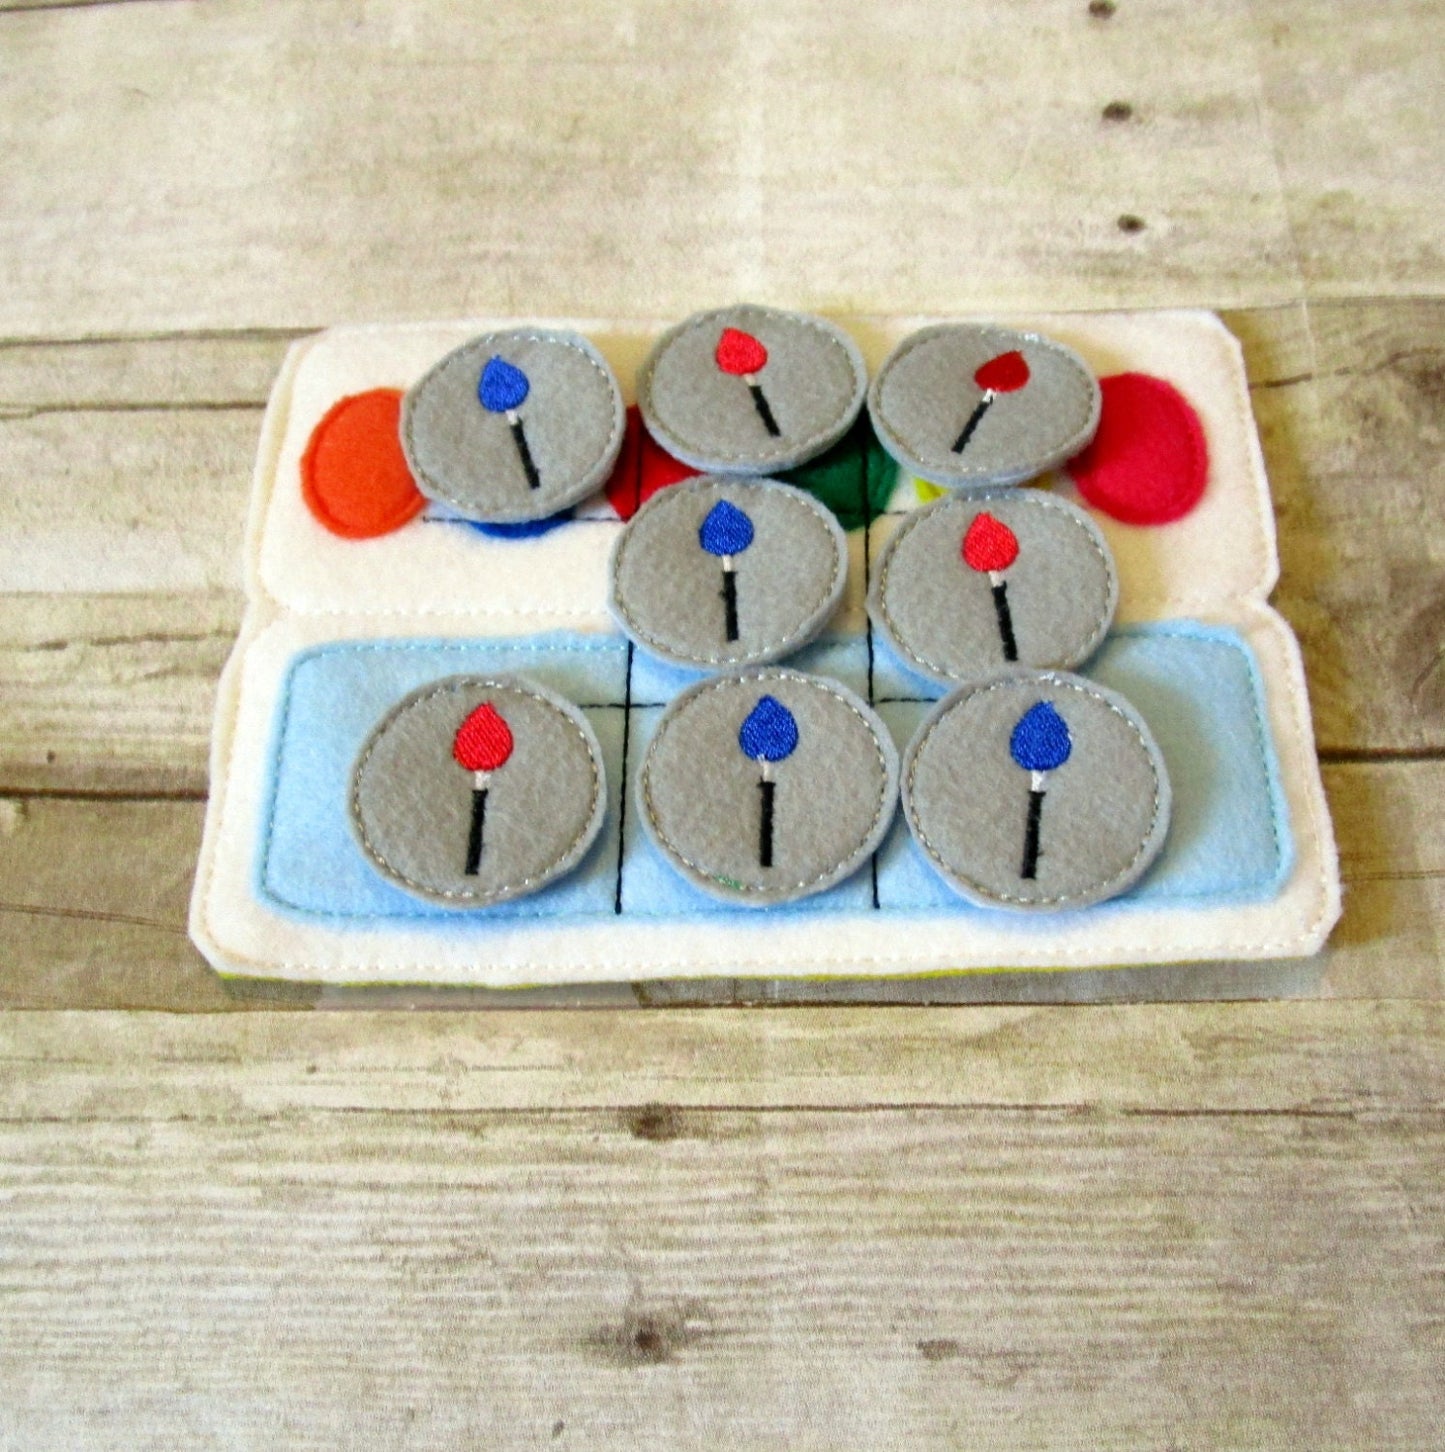 Handcrafted paint palette theme tic tac toe game for the artist boy and girl or girl in your life. Can be used as a gift or party favor.